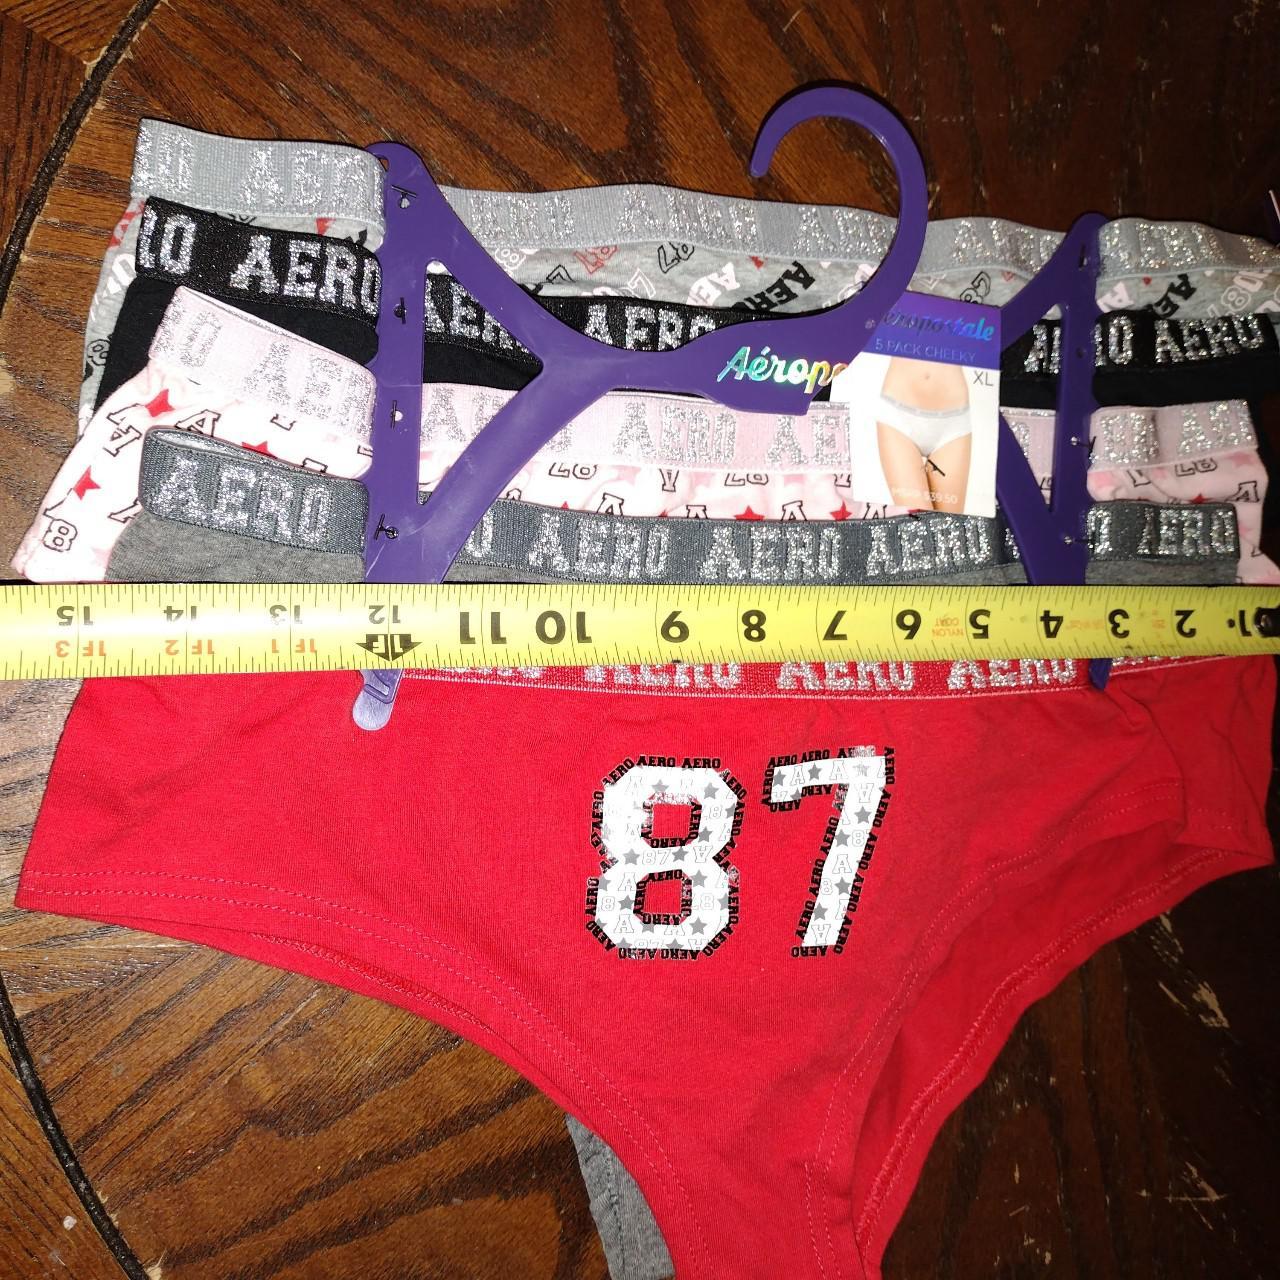 5 PACK CHEEKY THONGS SIZE XL BRAND NEW WITH TAGS  - Depop